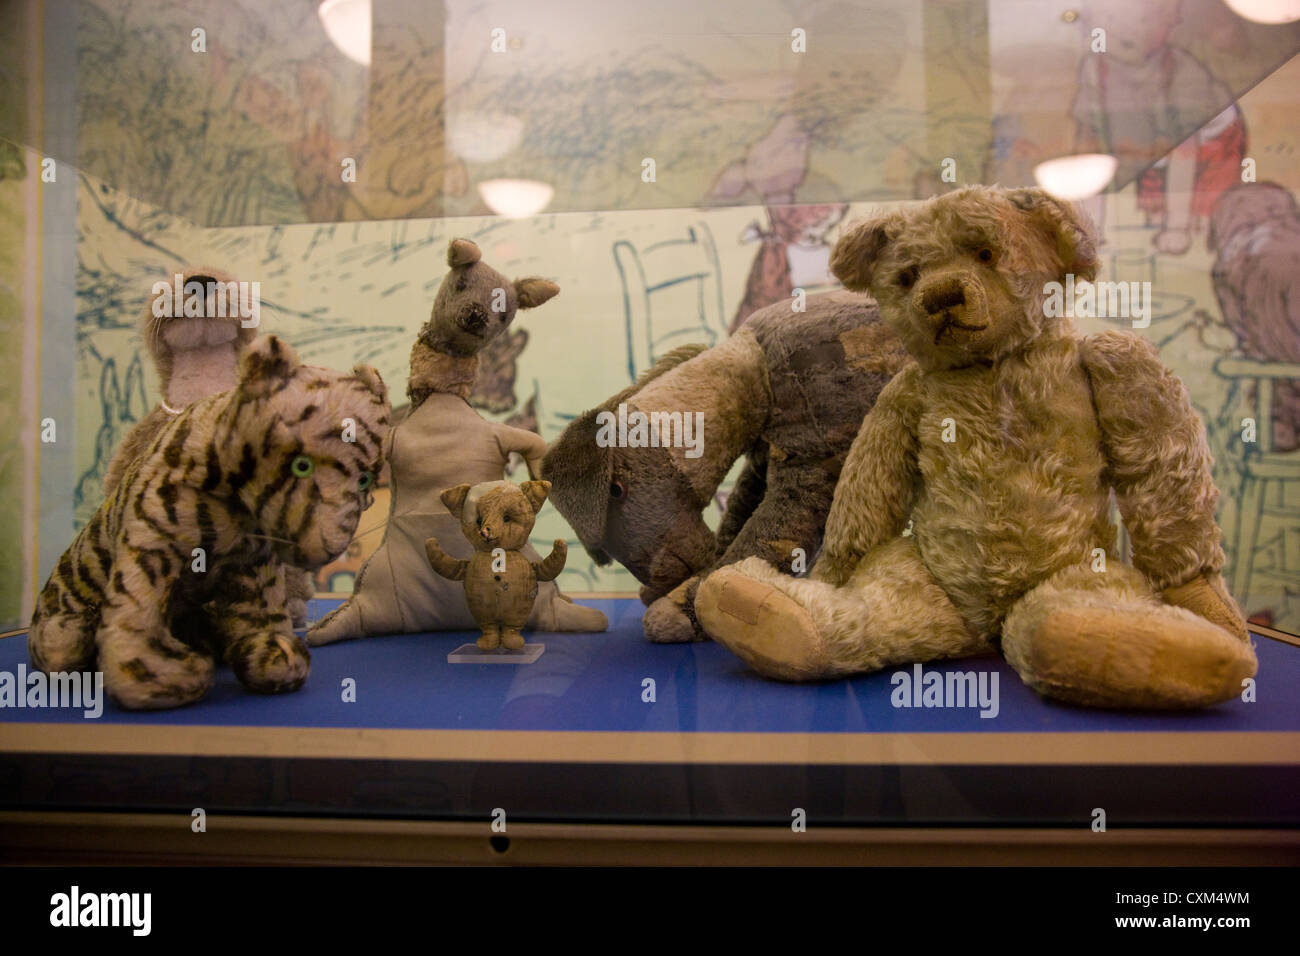 The original toys from A. A. Milne's Winnie the Pooh stories, held in the New York Public Library children's section Stock Photo